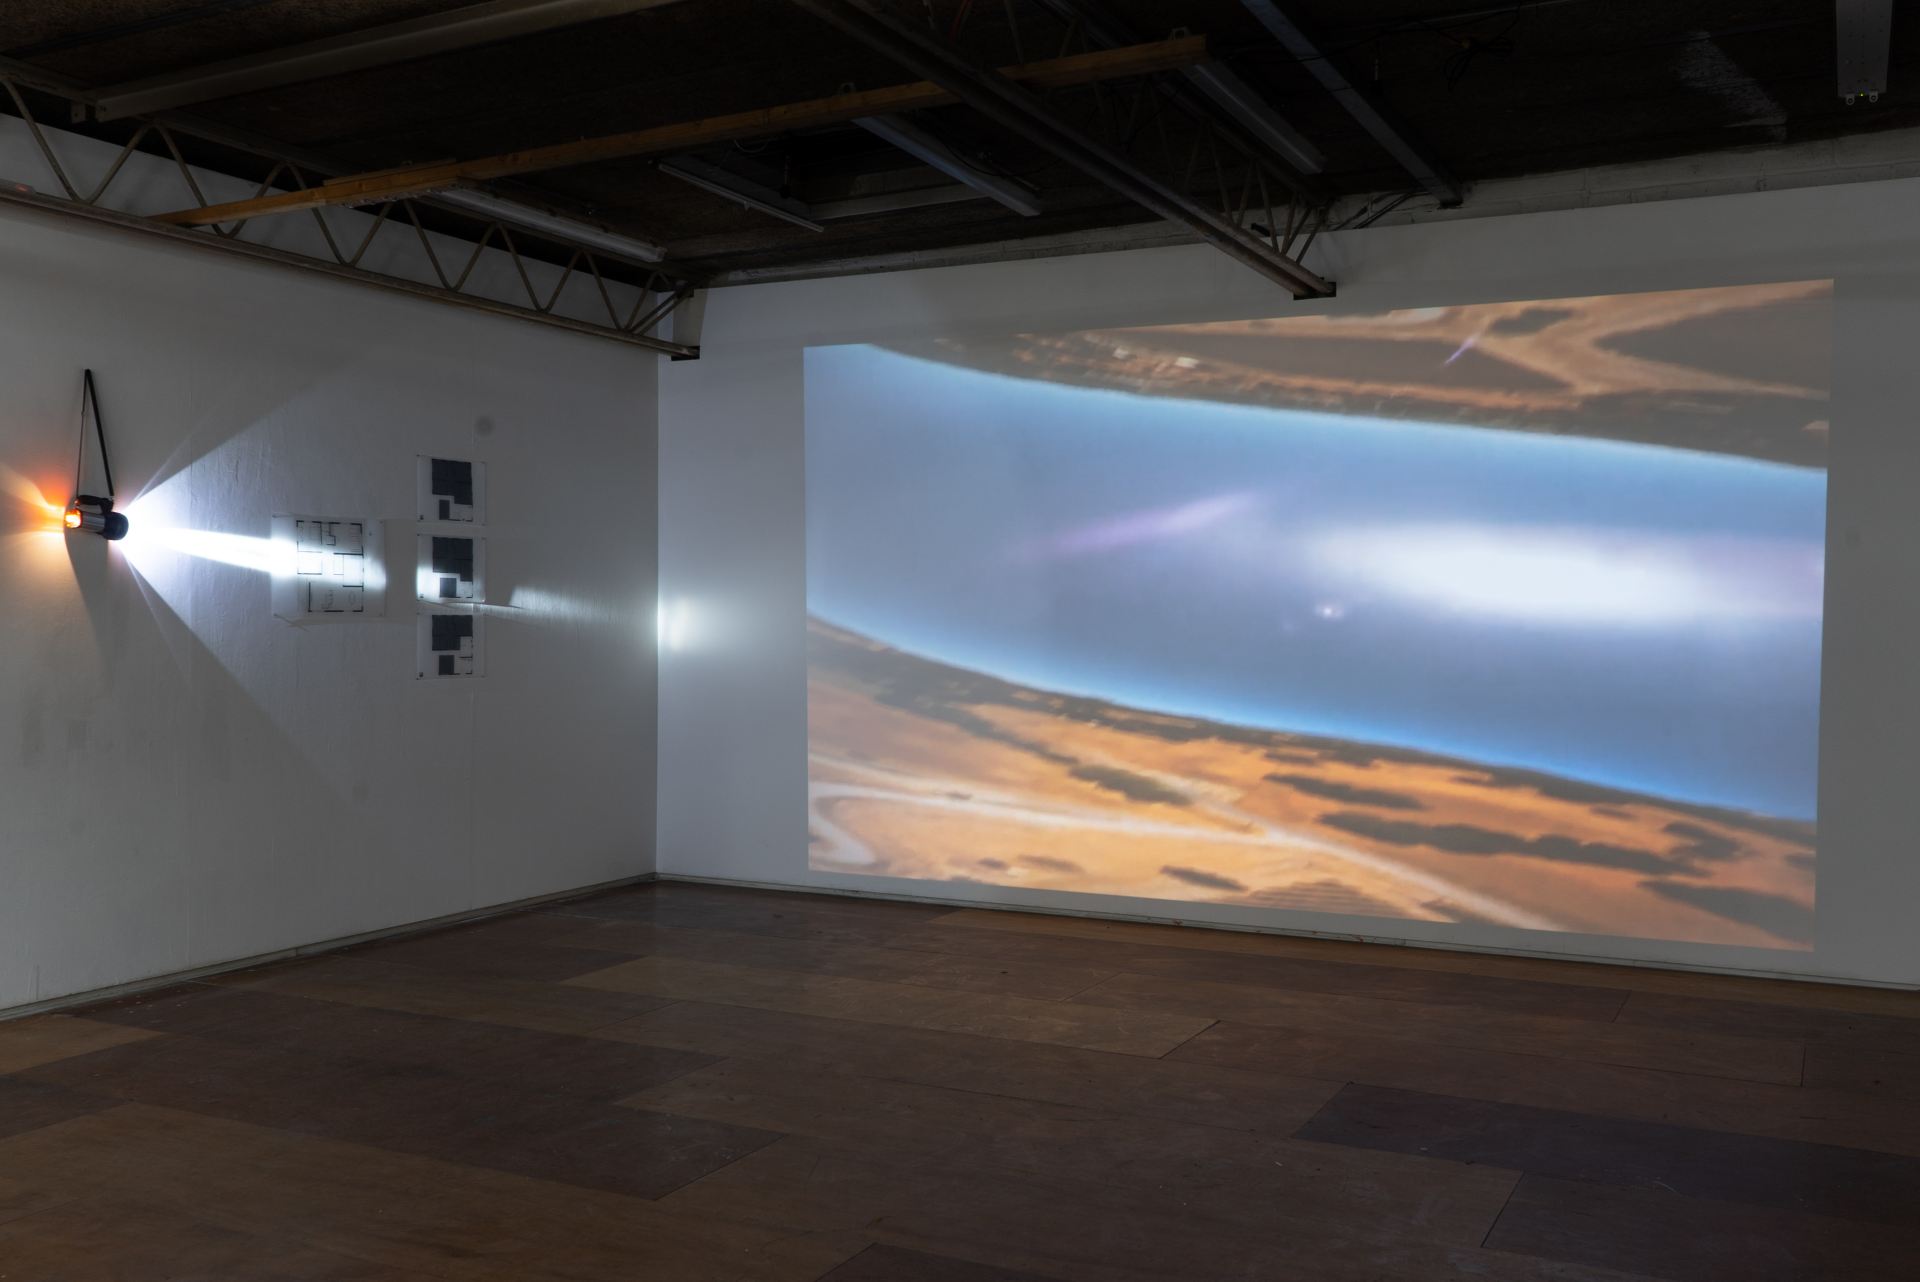 An image of a landscape projected on a wall.